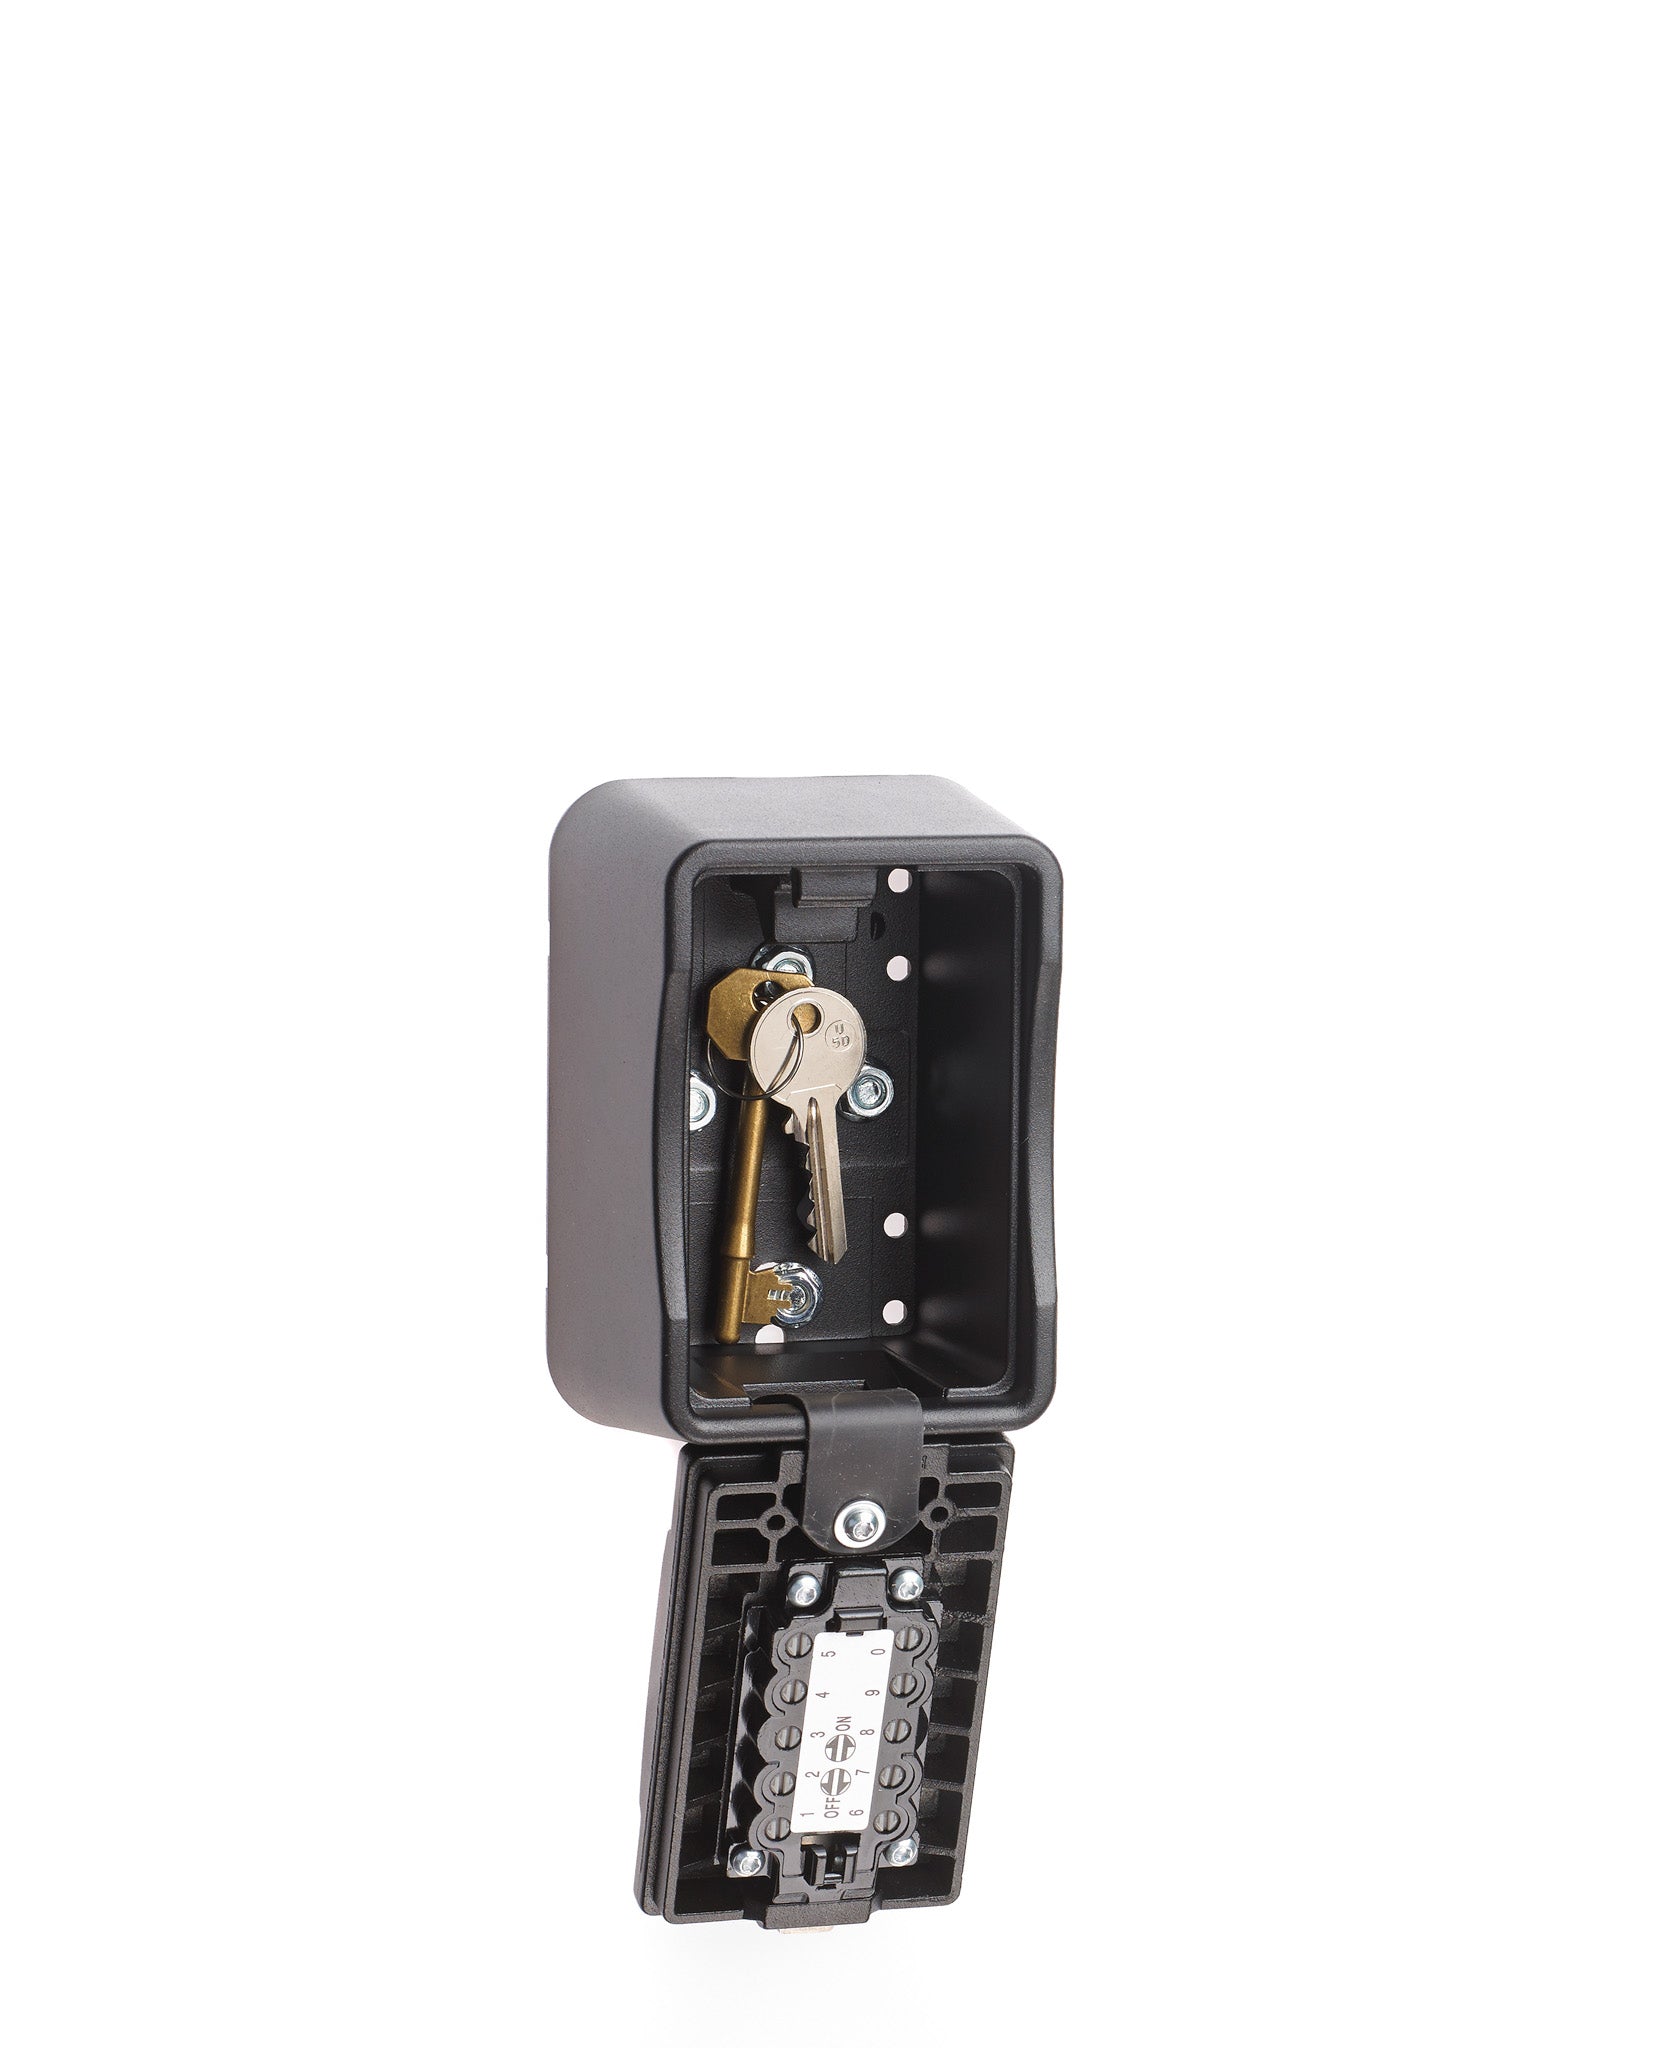 Open Supra S7 big box key safe with 2 keys inside large vault and hinged opening mechanism